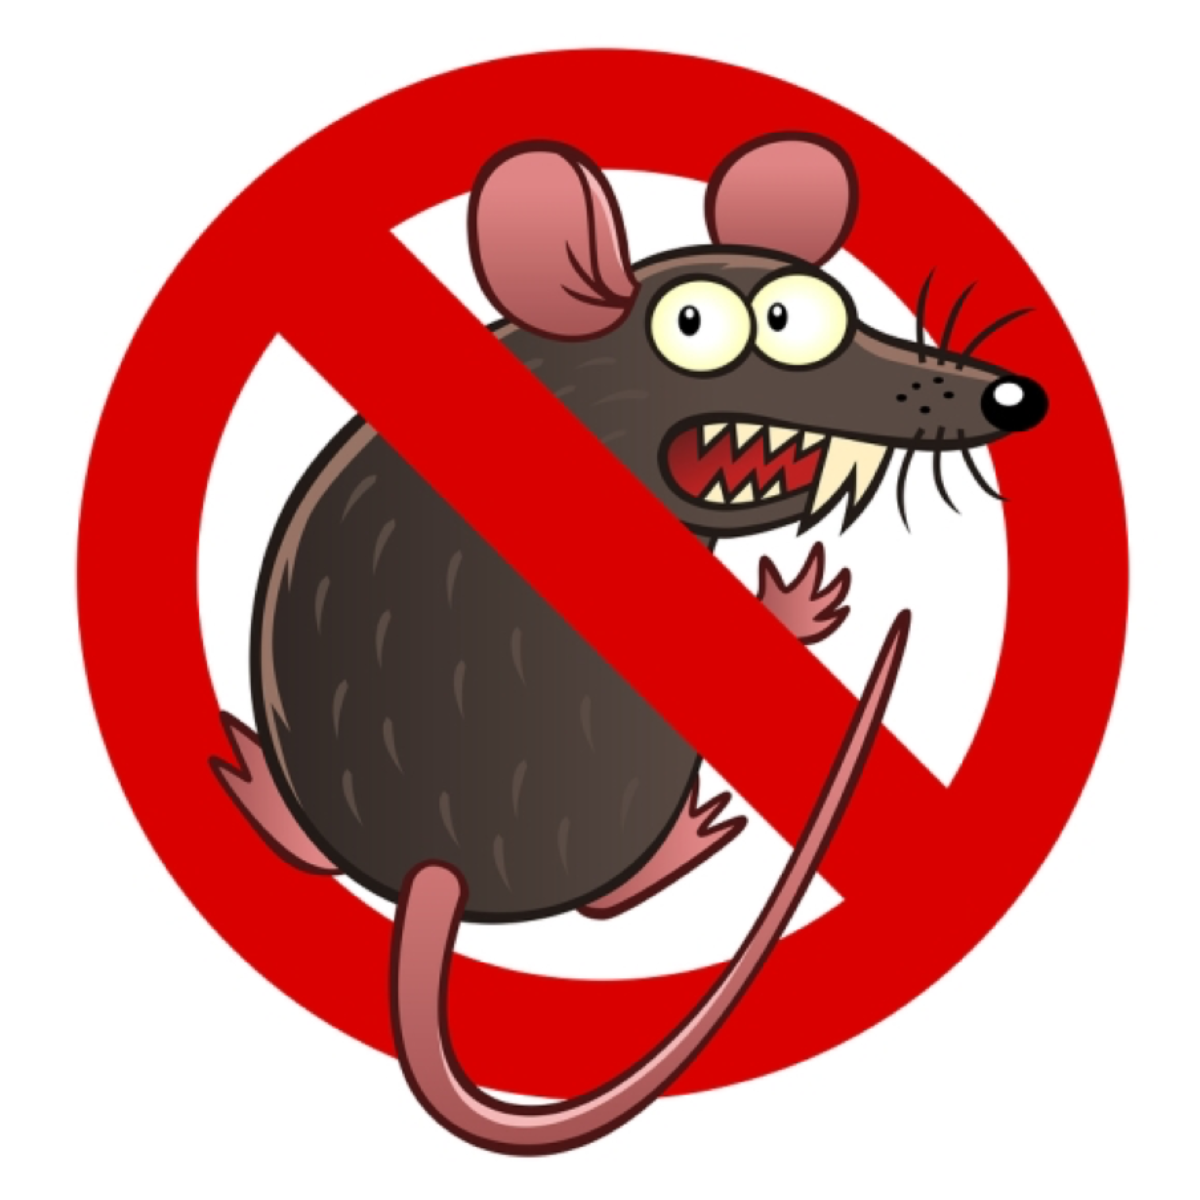 Rodent Control, Rat Removal, Mice Exterminator - One Two Tree